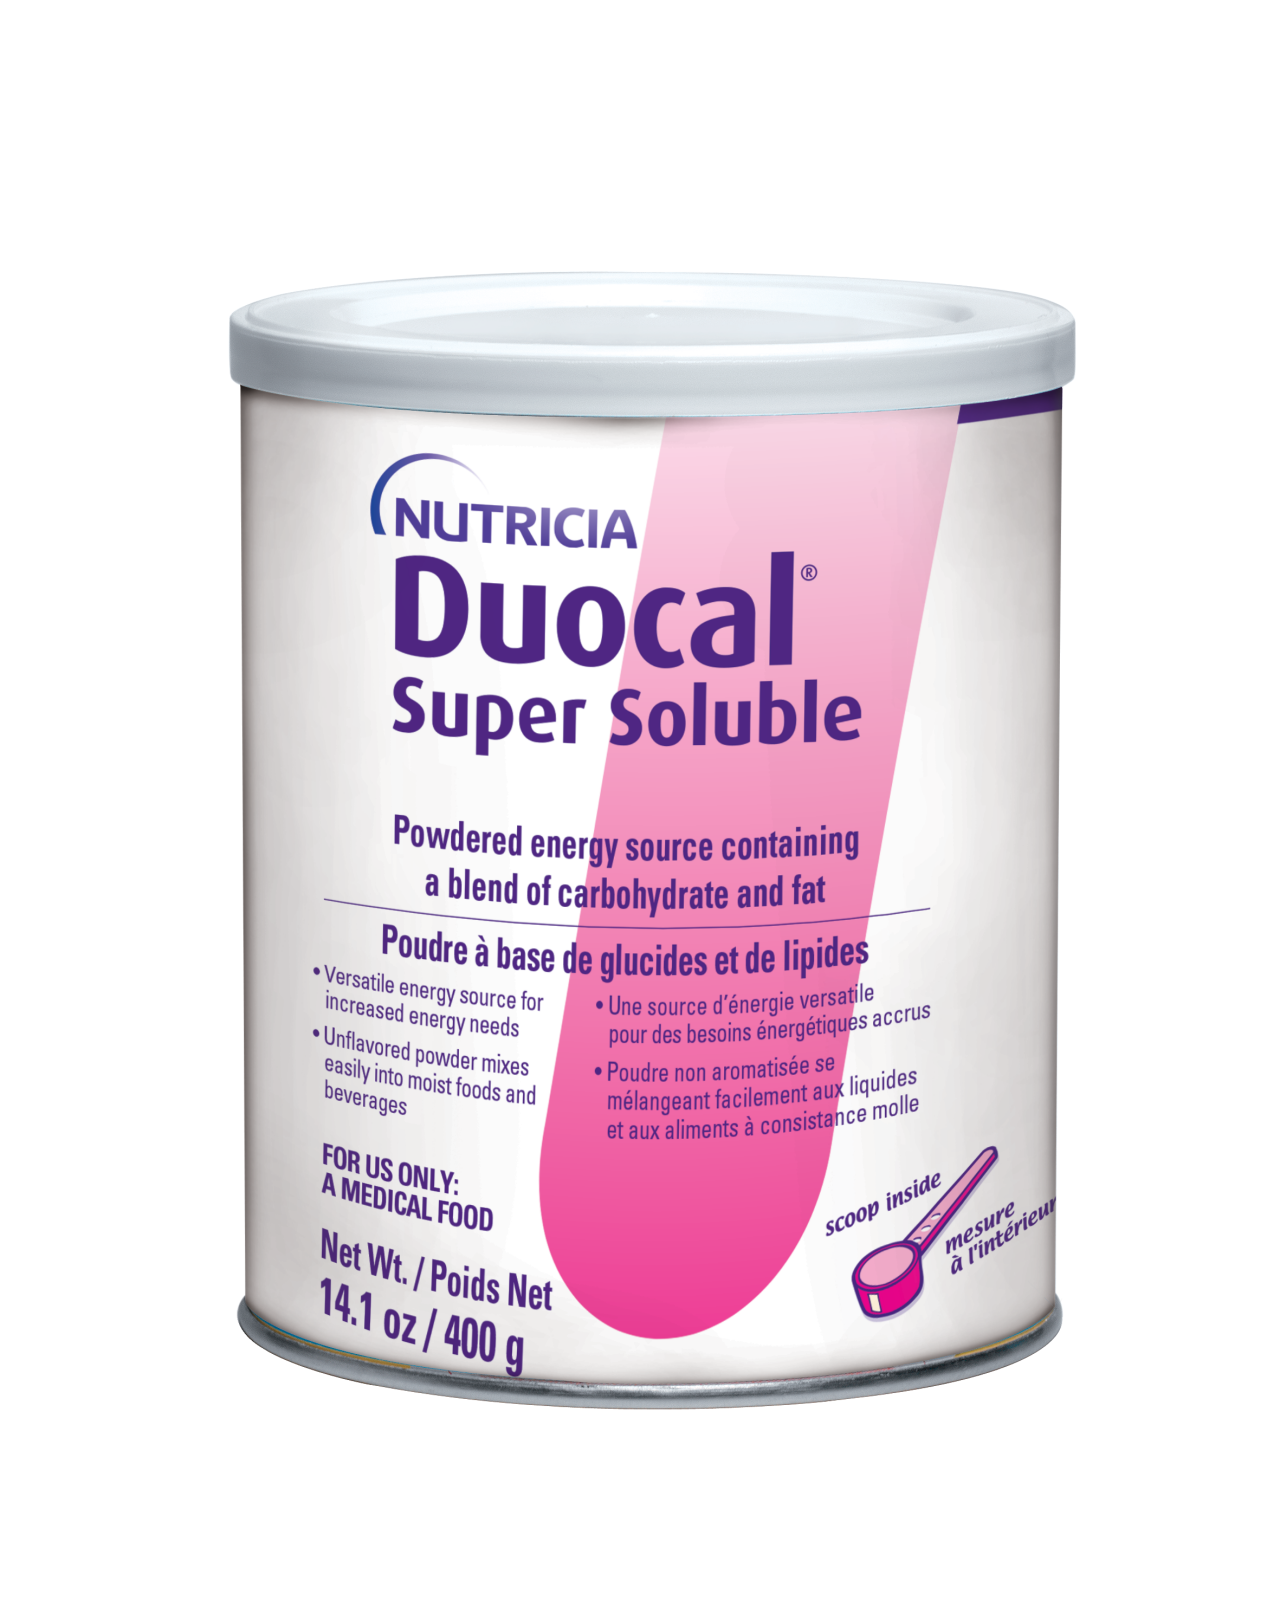 Super Soluble Duocal